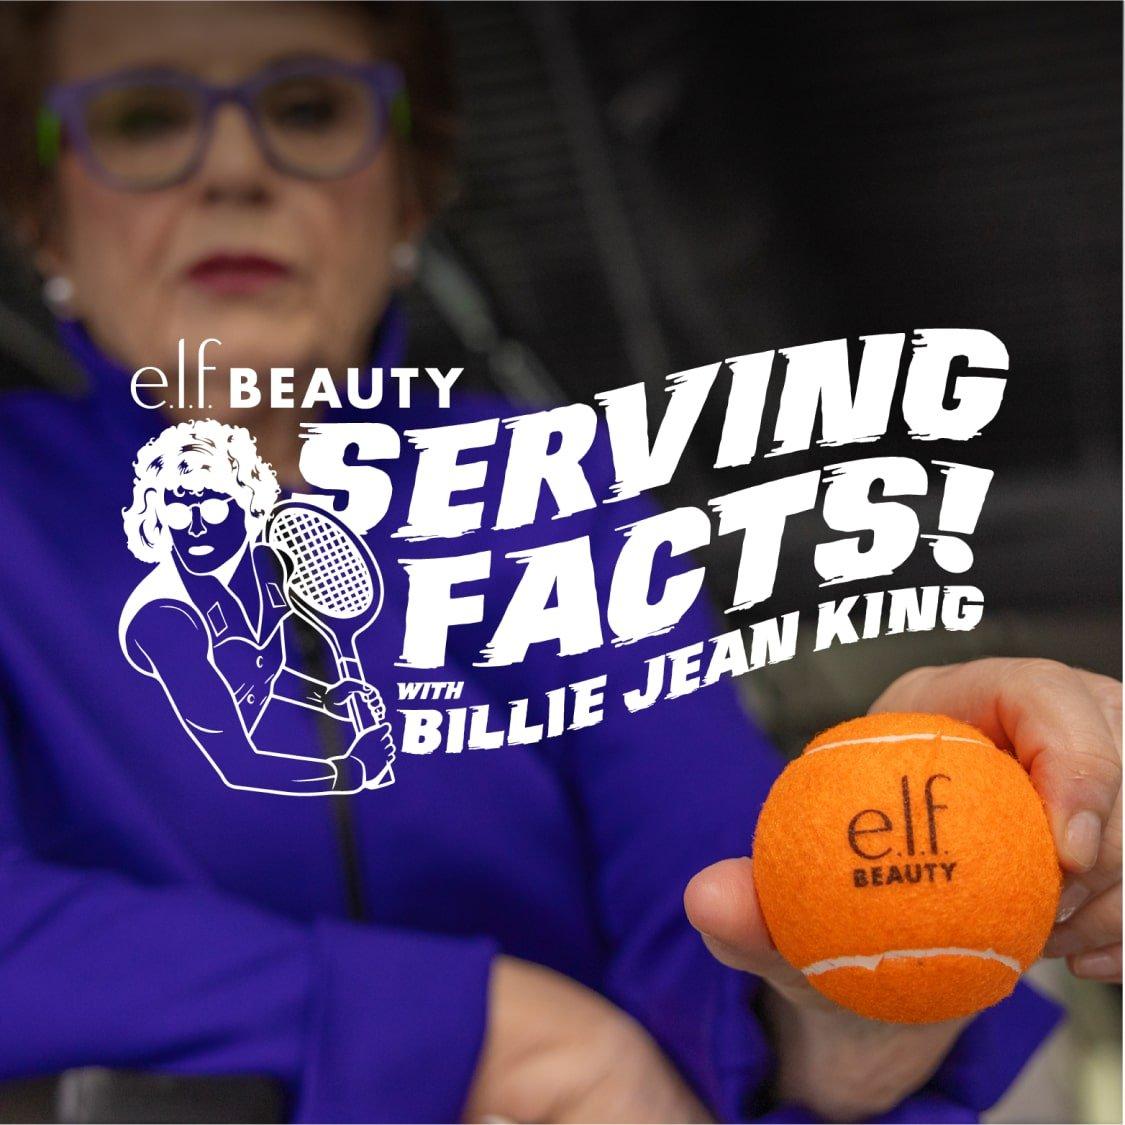 e.l.f. Beauty Serving Facts with Billie Jean King: Average U.S. Corporate Board is only 12% diverse.